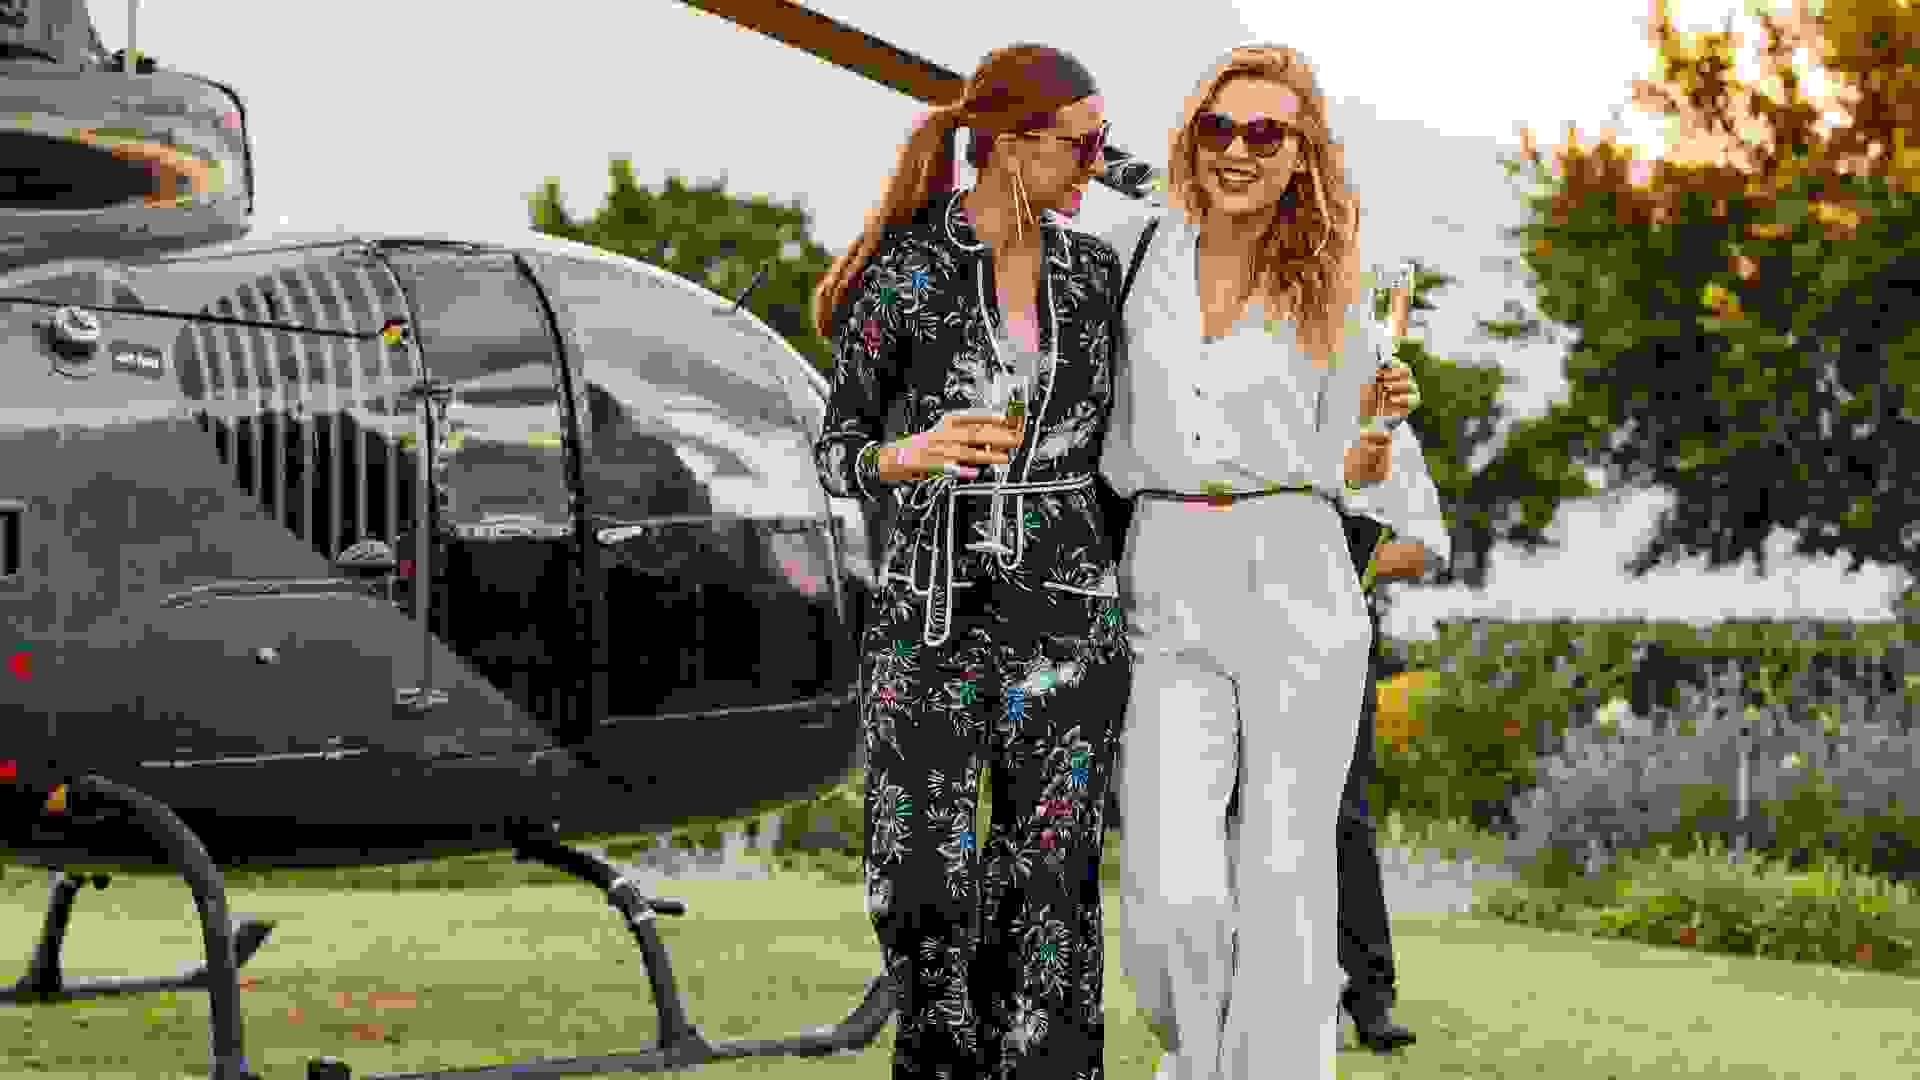 Two young women walking away from a helicopter with a glass of wine in their hands.